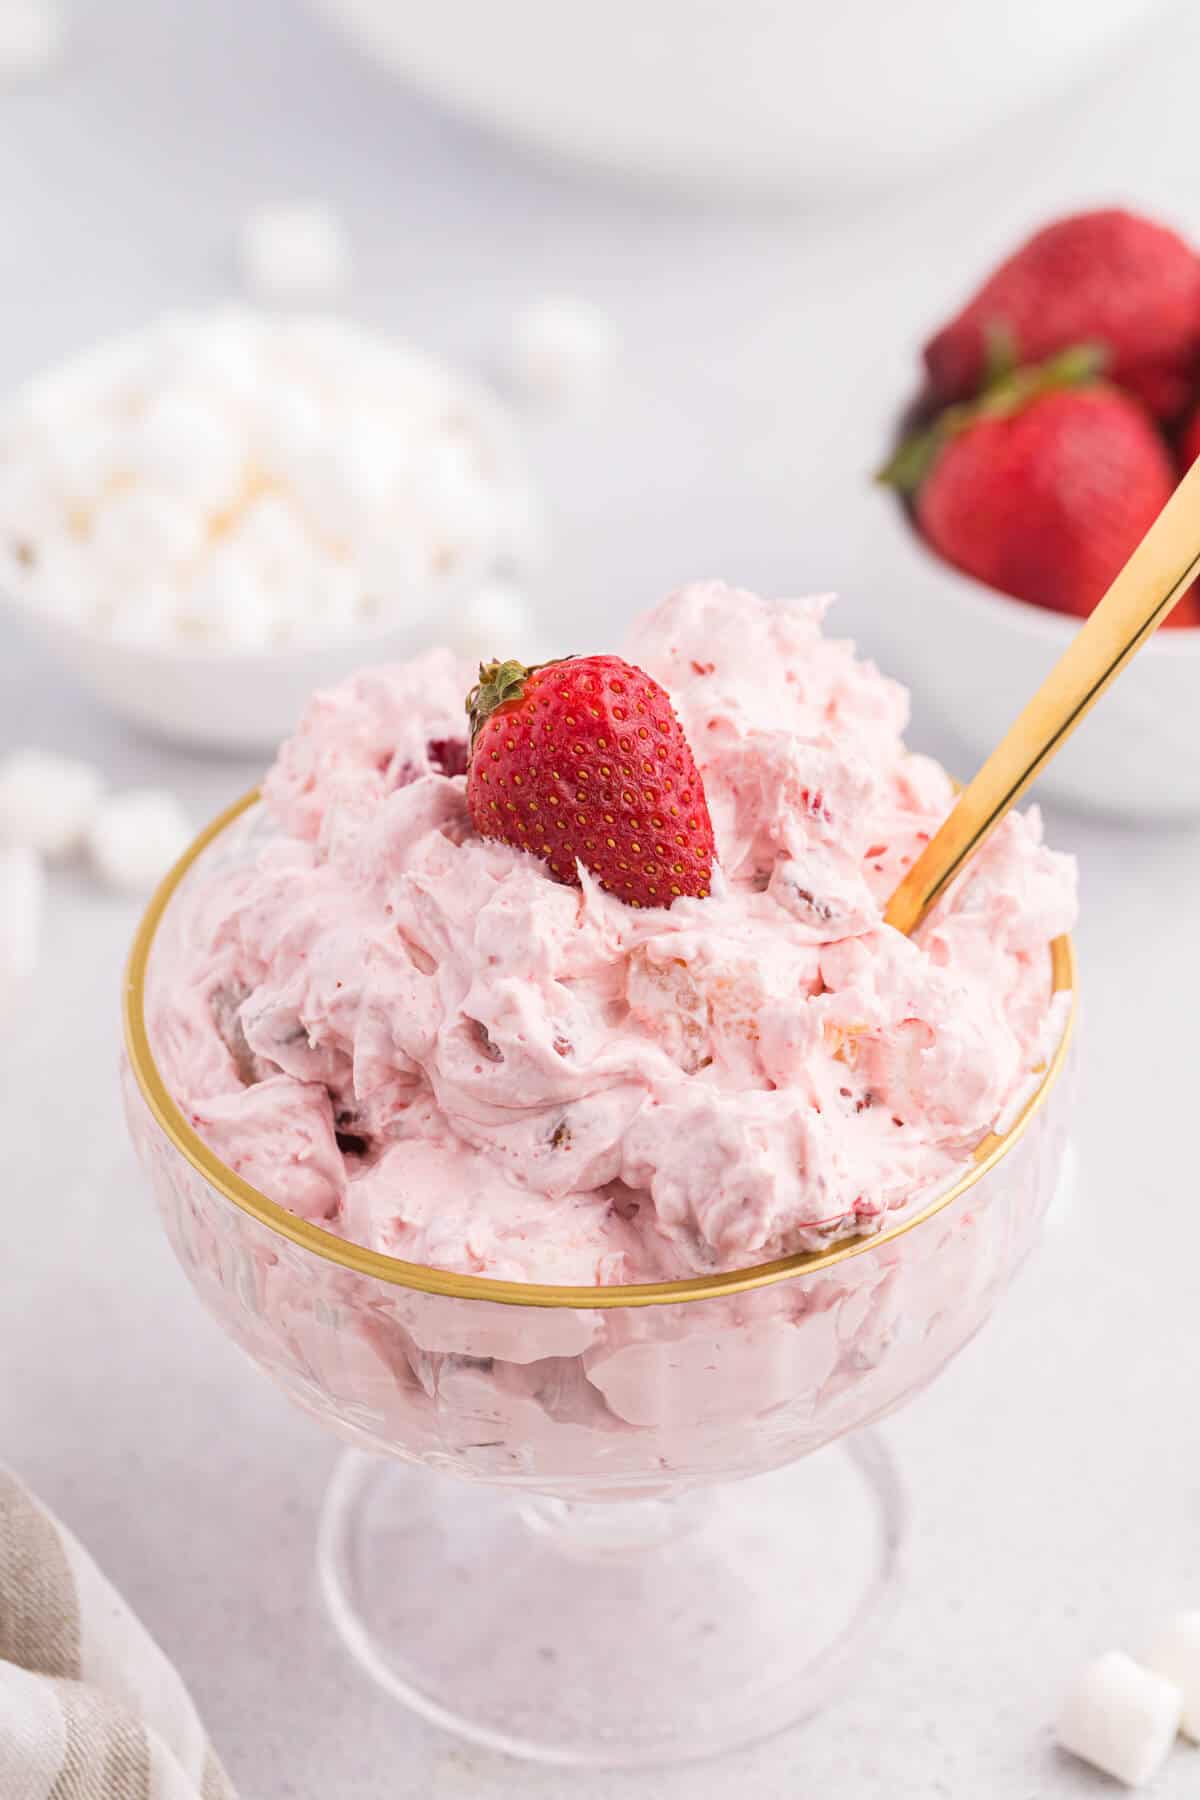 Strawberry fluff salad in a parfait dish with a spoon.